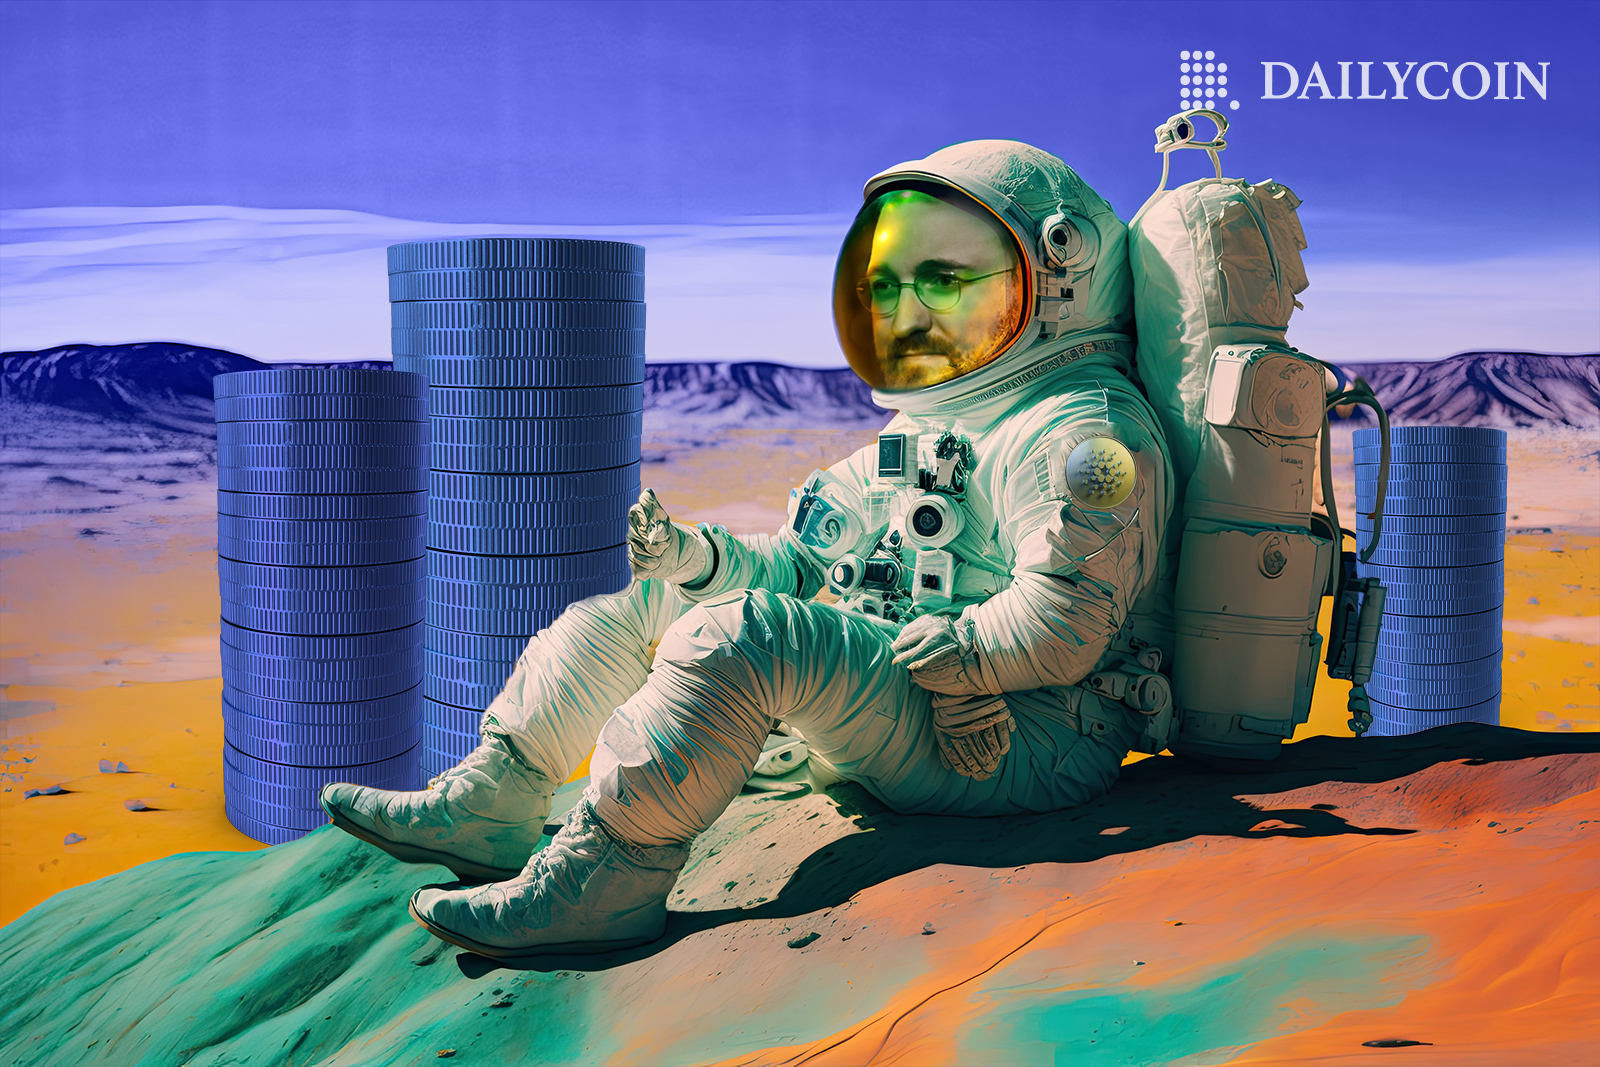 Charles Hoskinson sits on Mars with an astronaut suit next to ADA tokens.